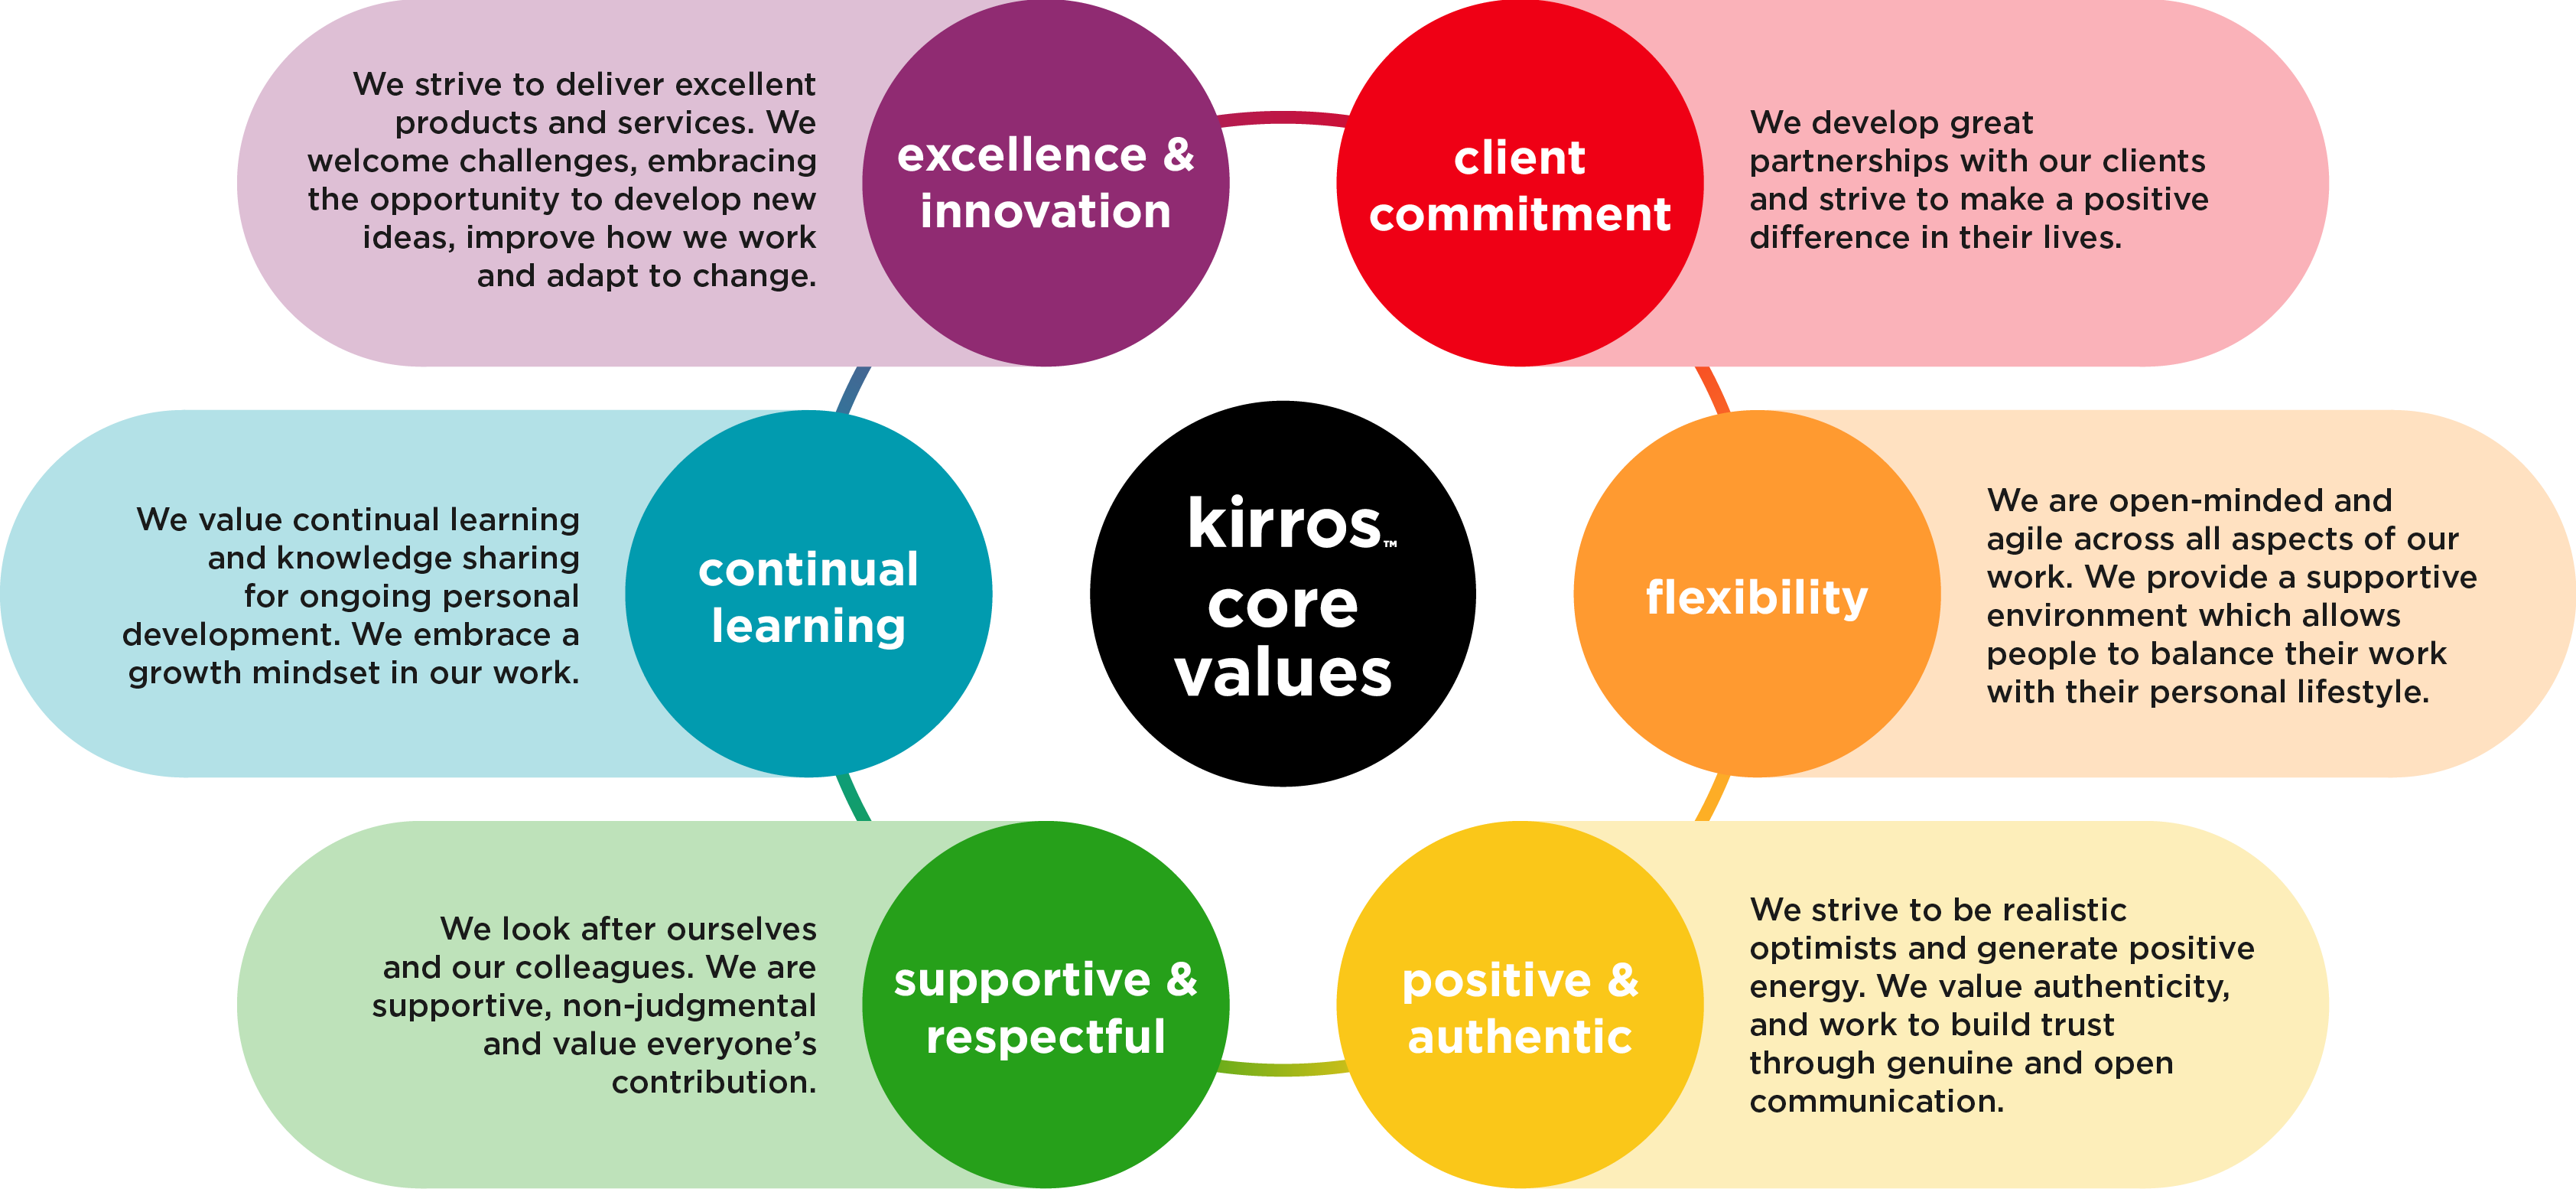 Our Values Image